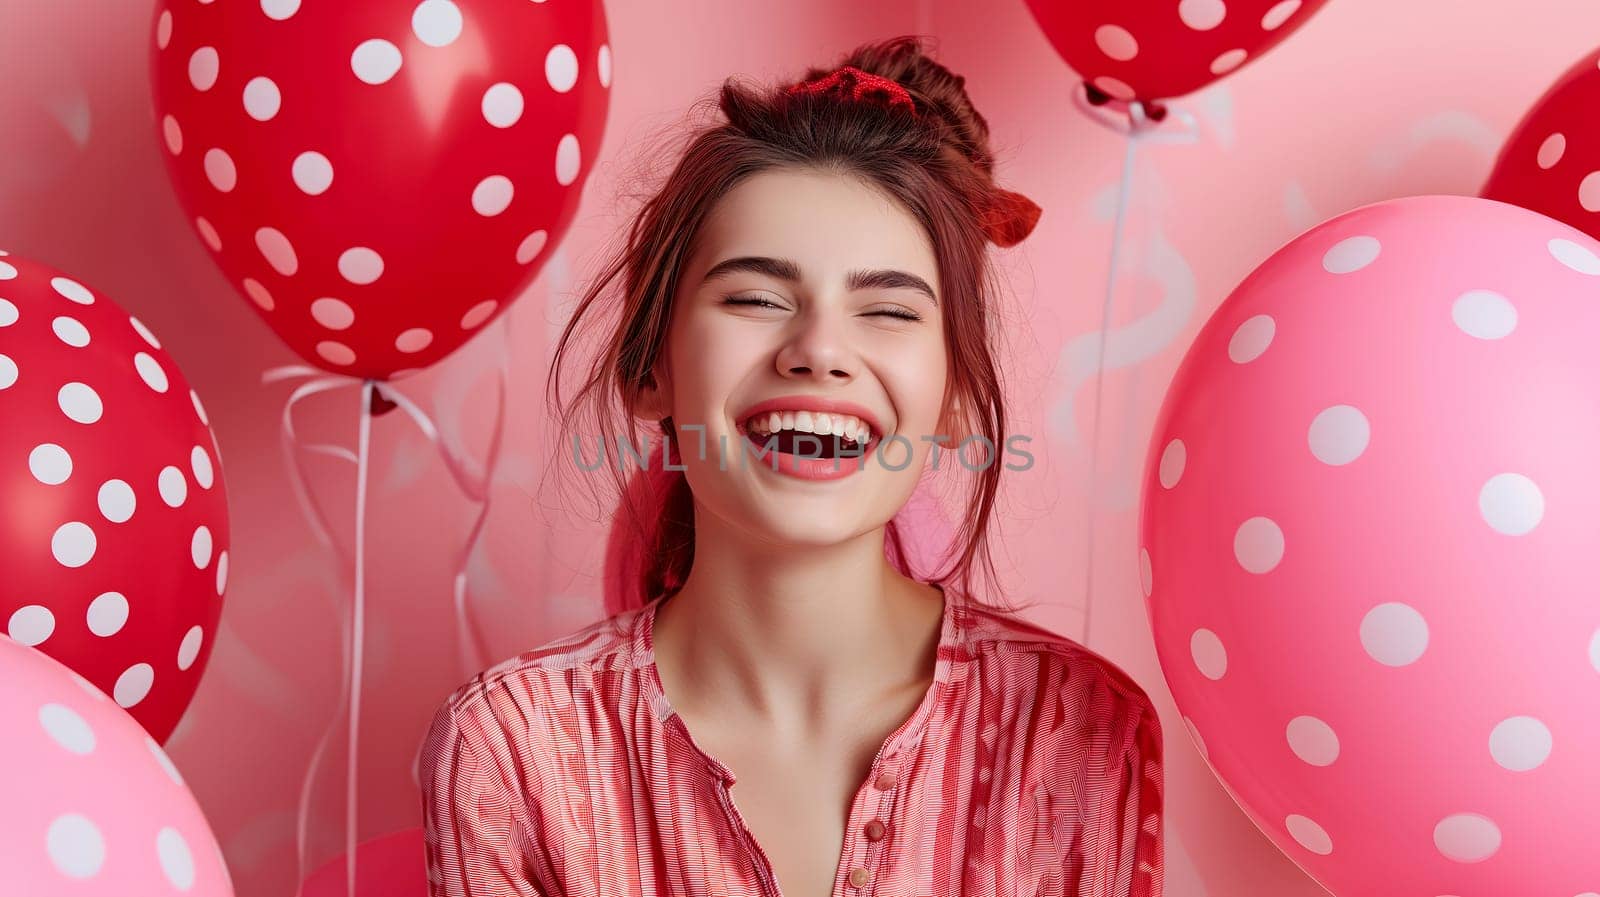 Young adult woman with red and pink air balloons laughing, on pink polka dots background. Happy holiday party. Joyful beauty having fun, celebrating Valentine's Day. by z1b